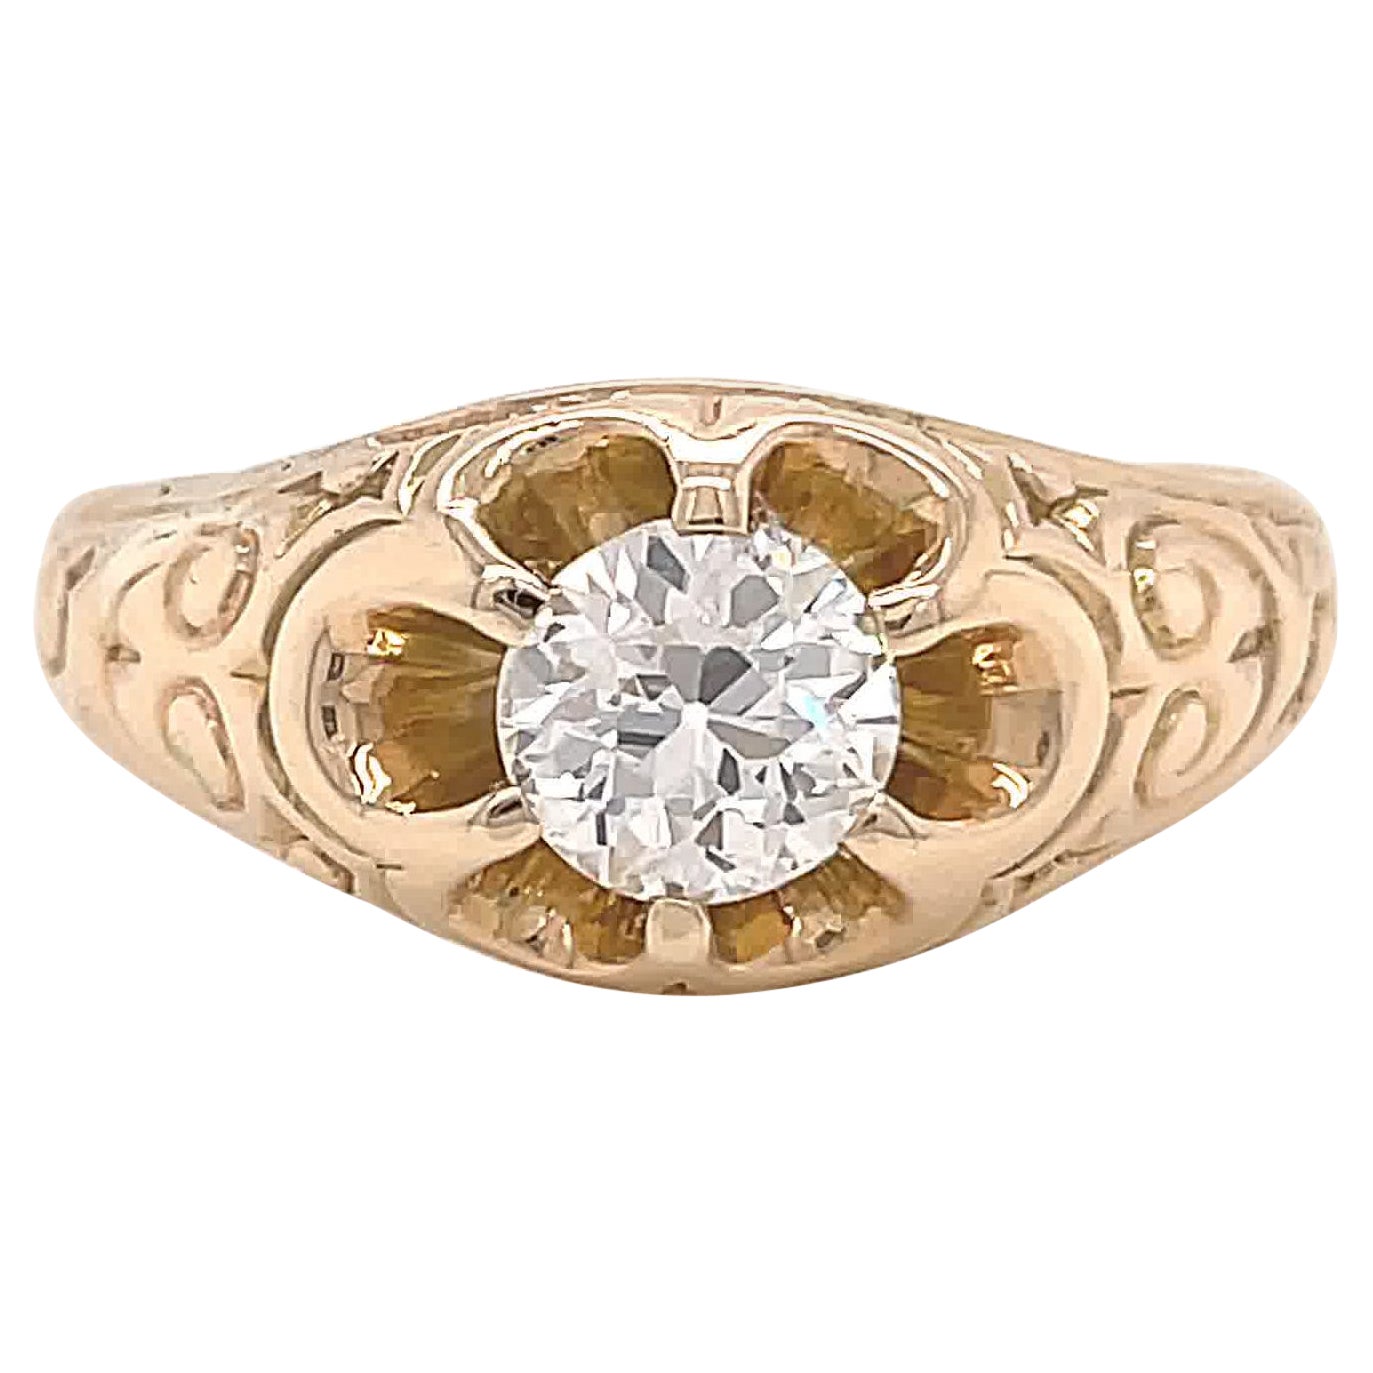 Victorian Revival GIA Round Brilliant Cut Diamond Gold Engagement Ring